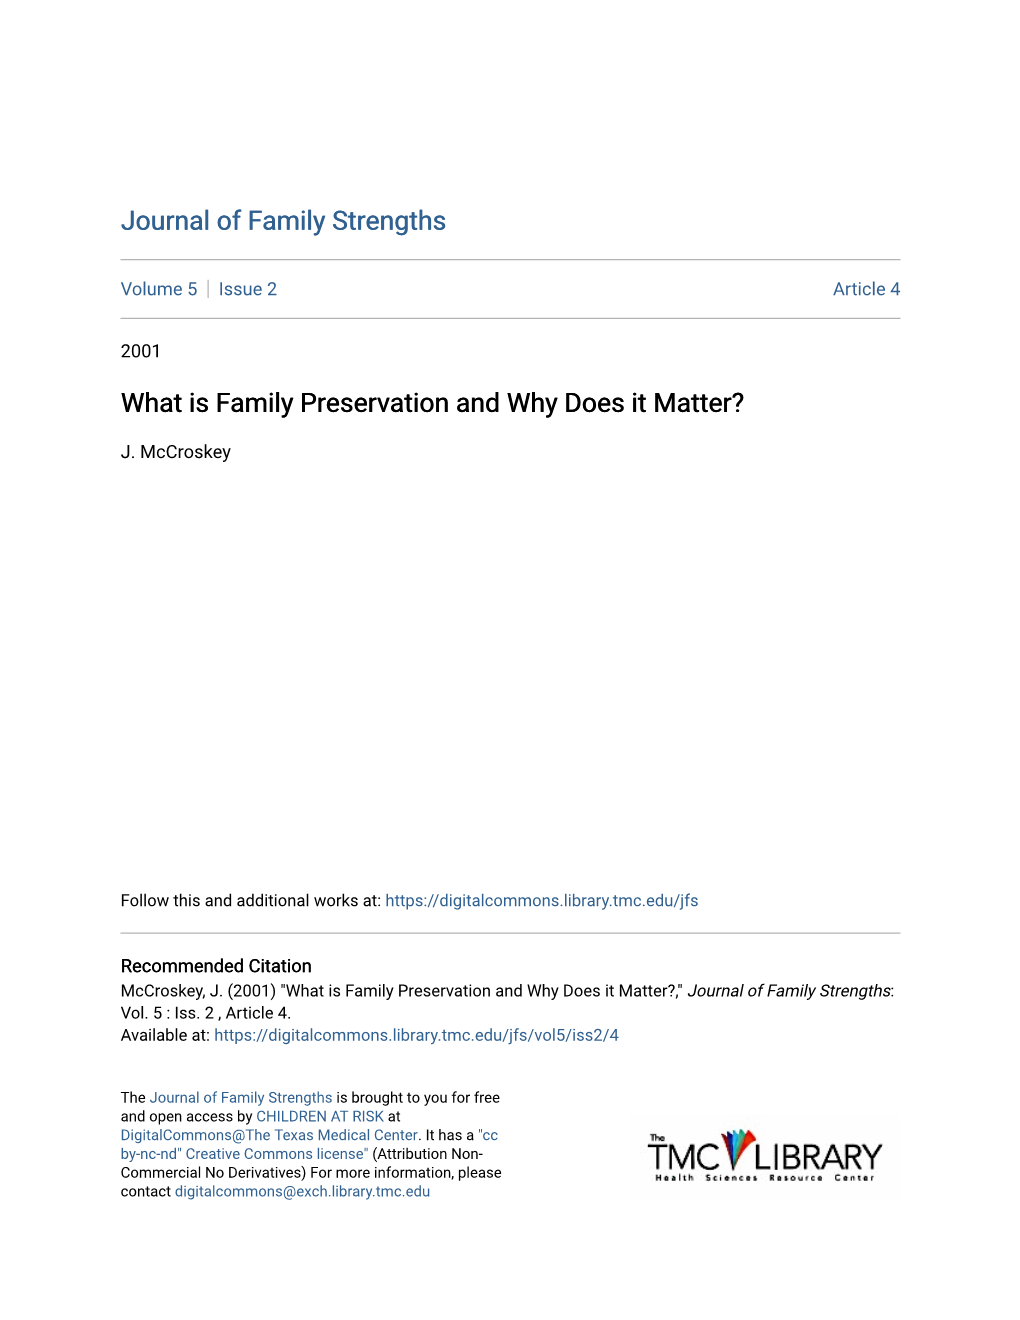 What Is Family Preservation and Why Does It Matter?